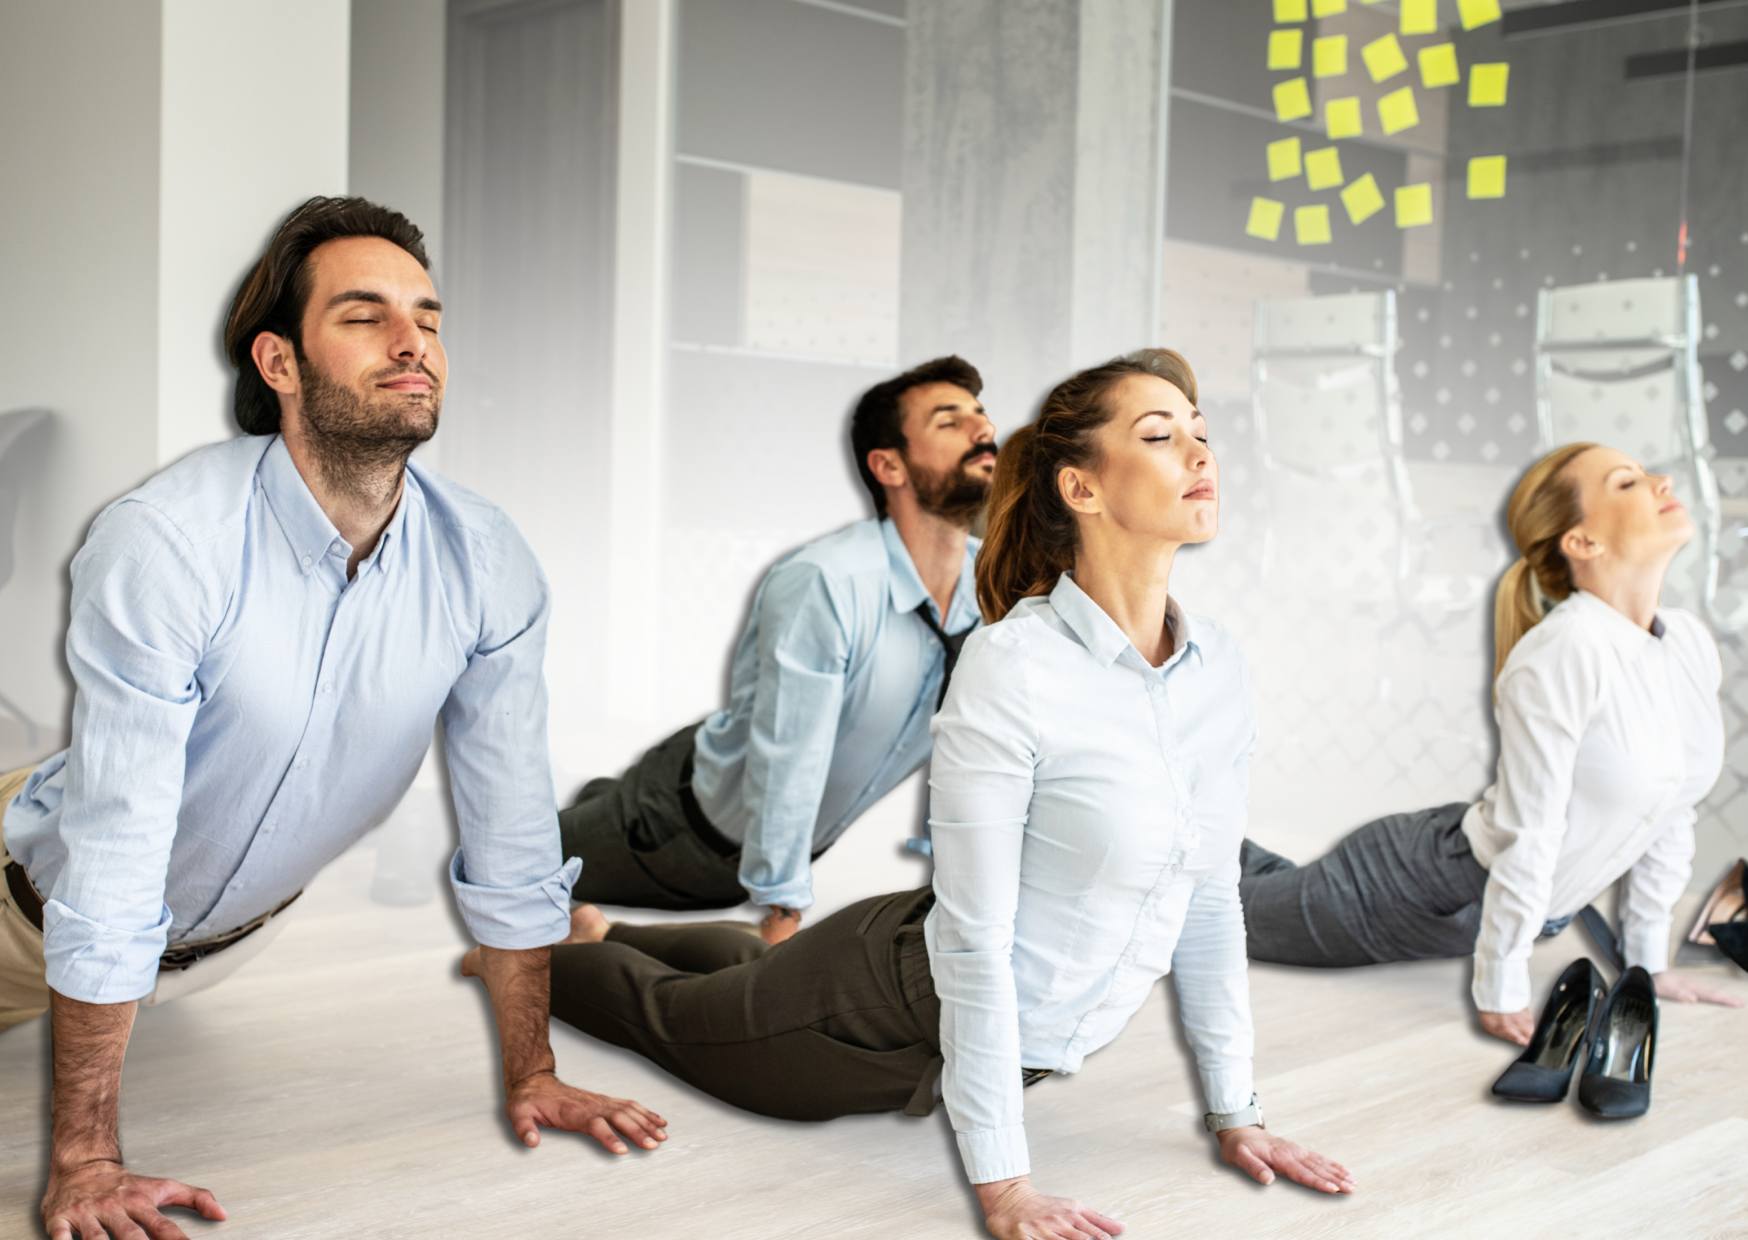 employees-doing-fitness-in-the-workplace-adopting-a-yoga-pose